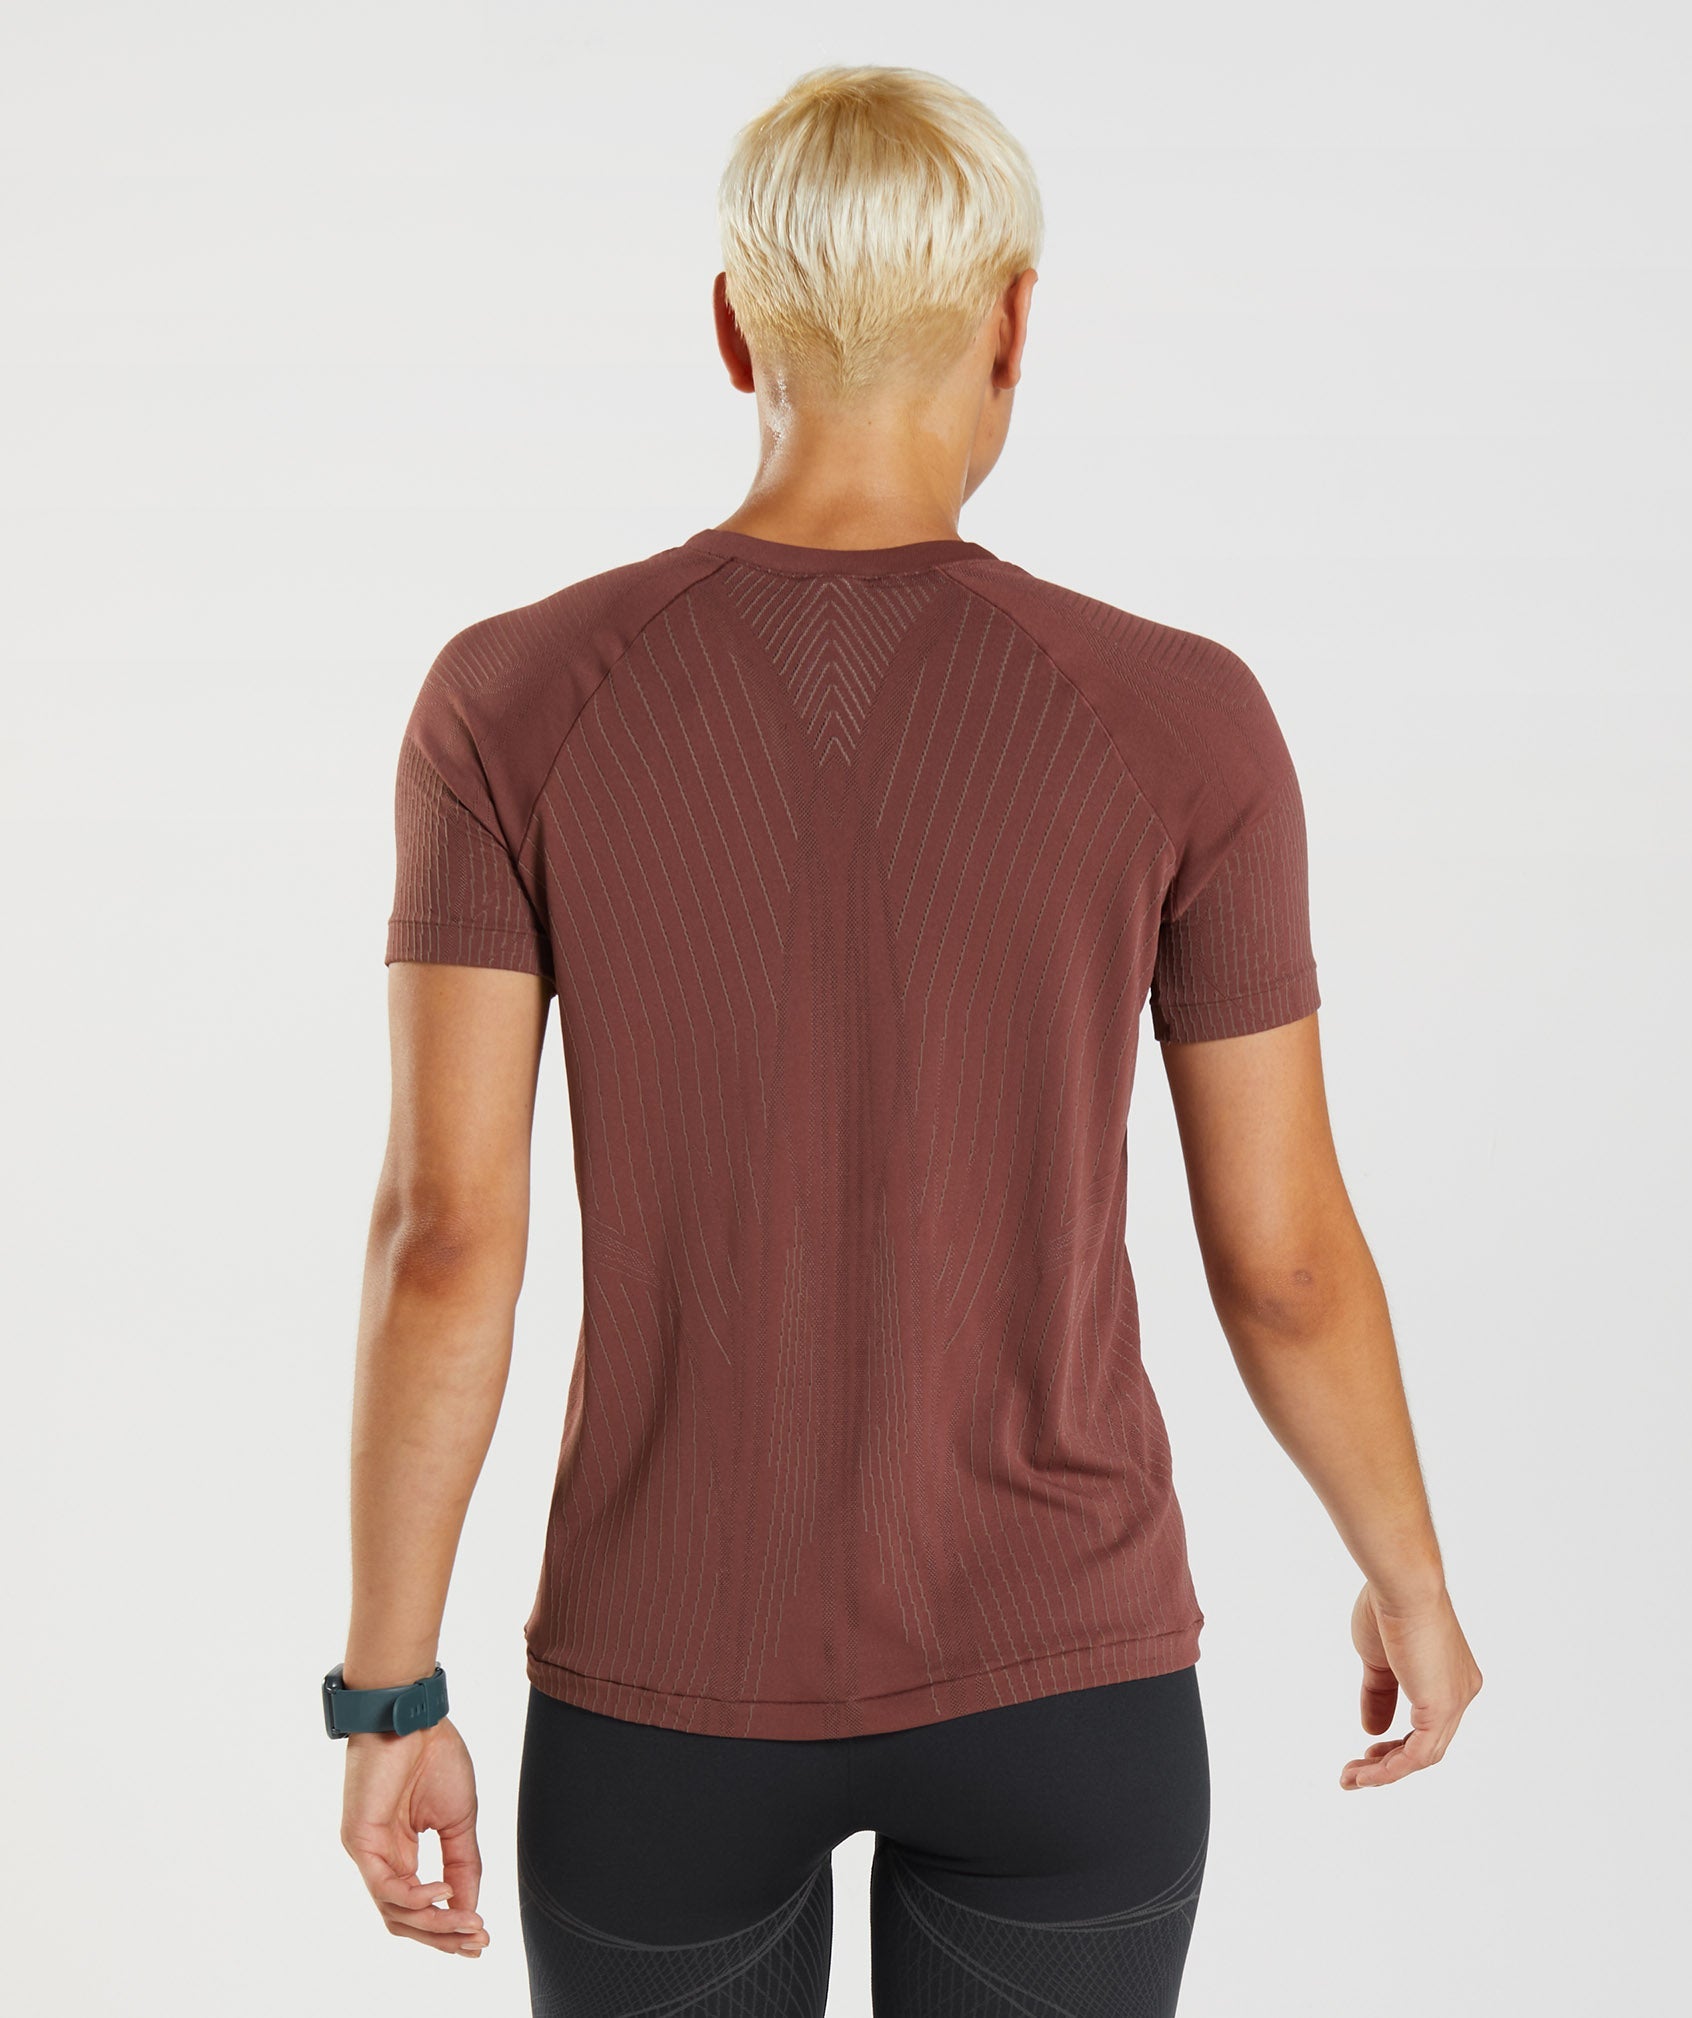 Apex Seamless Top in Cherry Brown/Truffle Brown - view 2